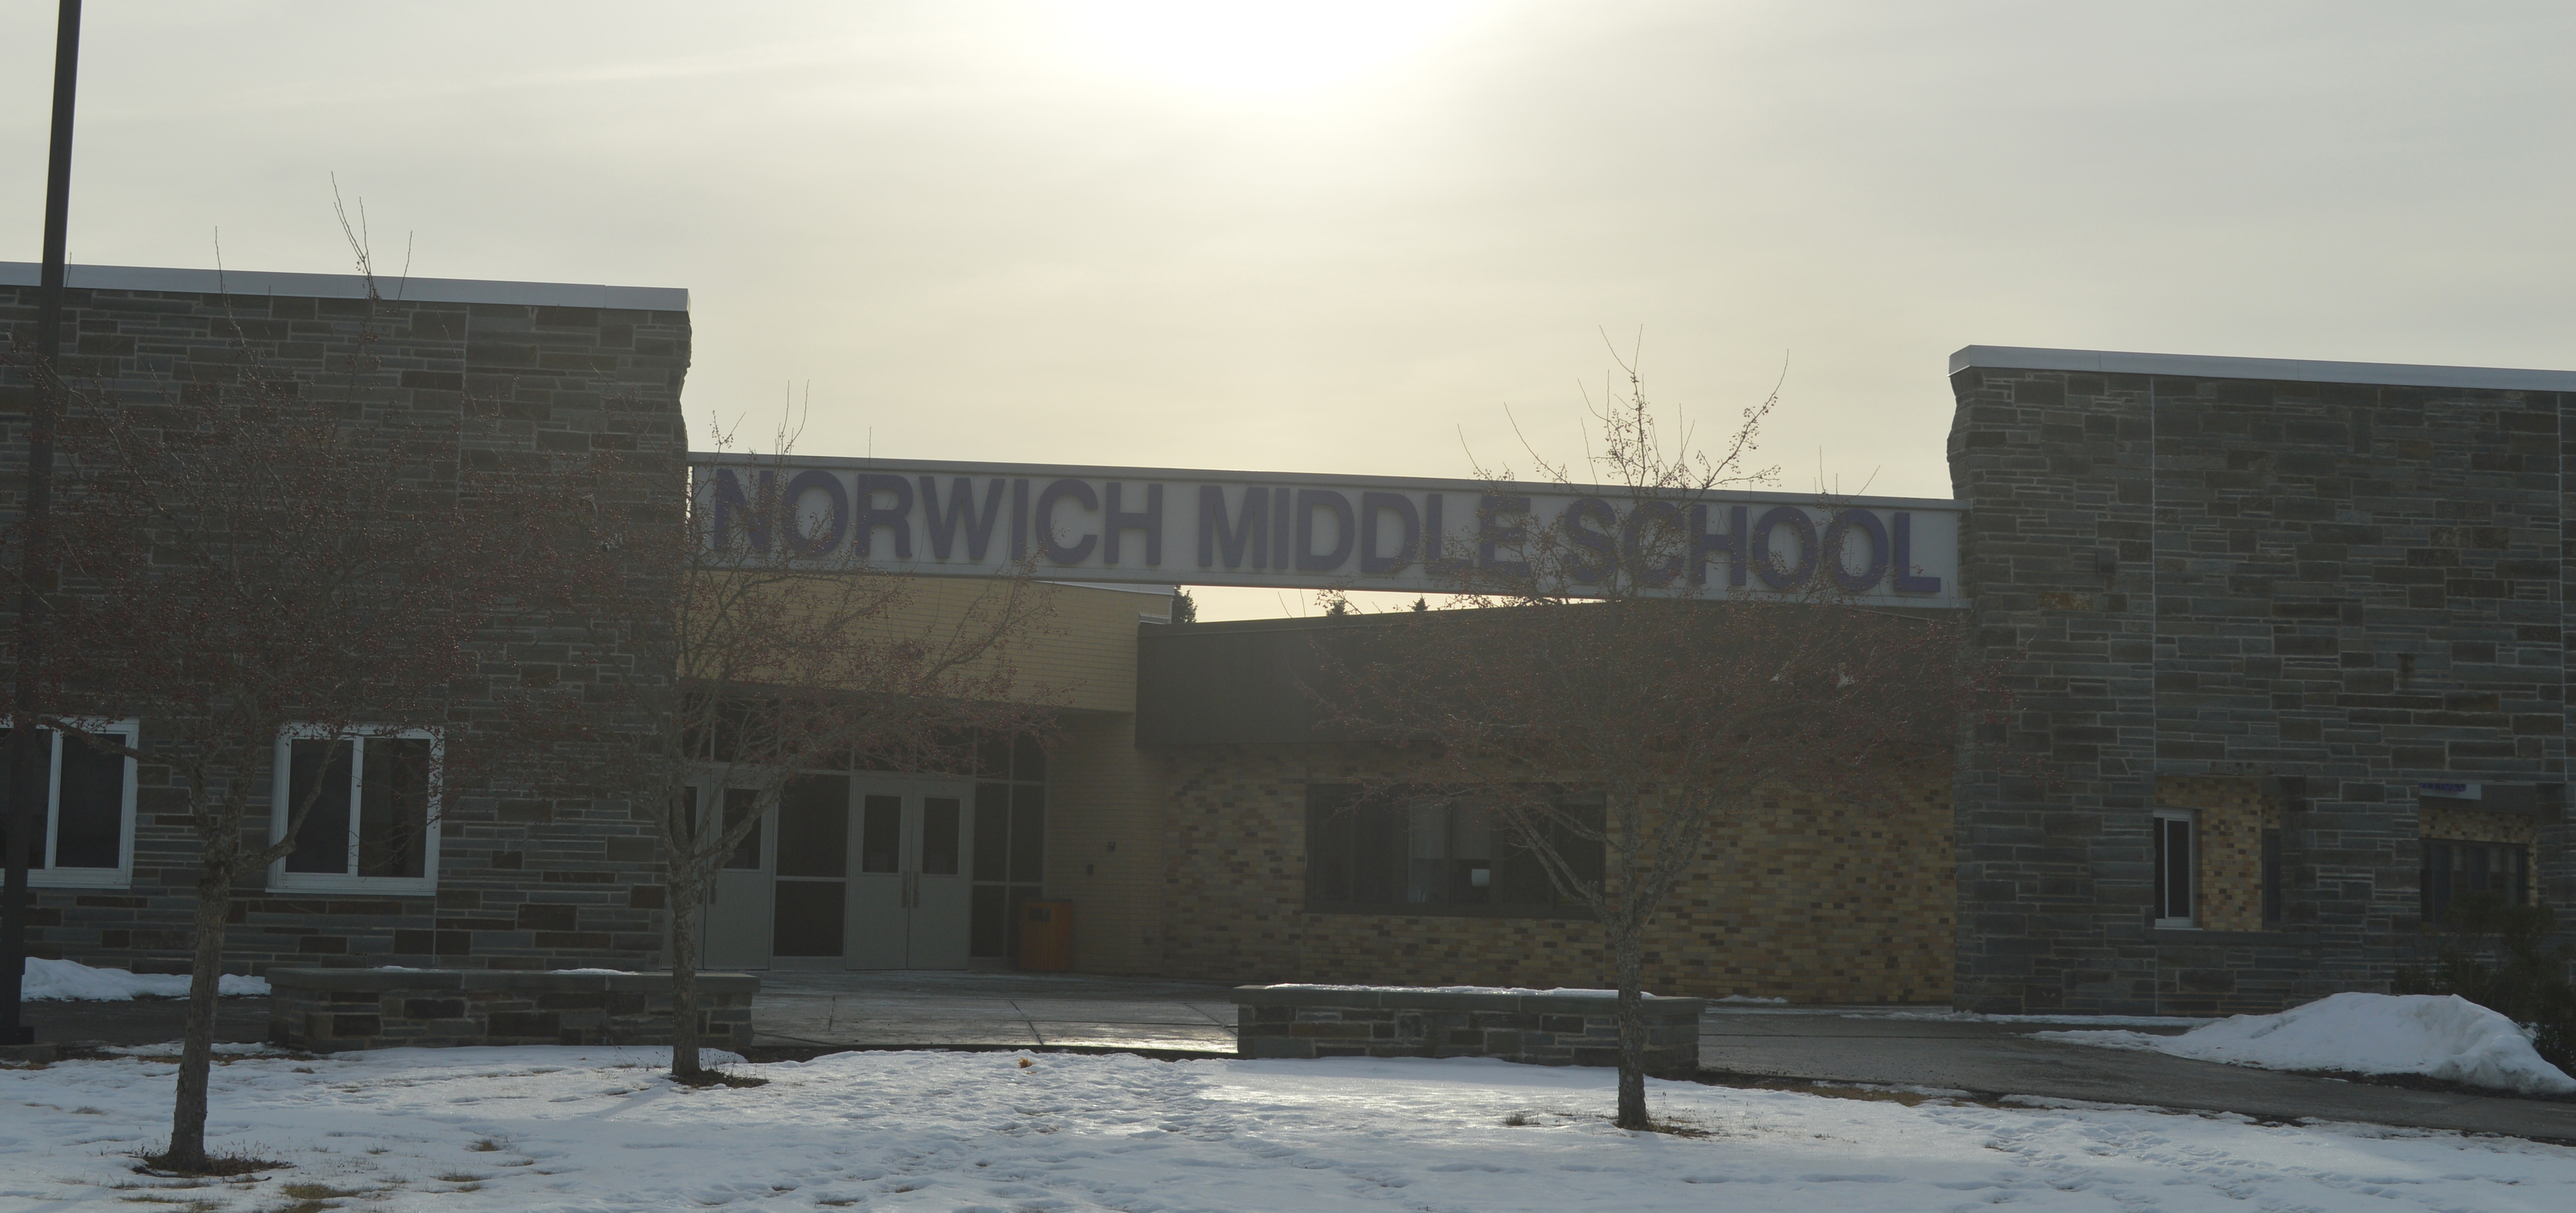 Norwich Schools thinking outside the box to recover from fiscal stress